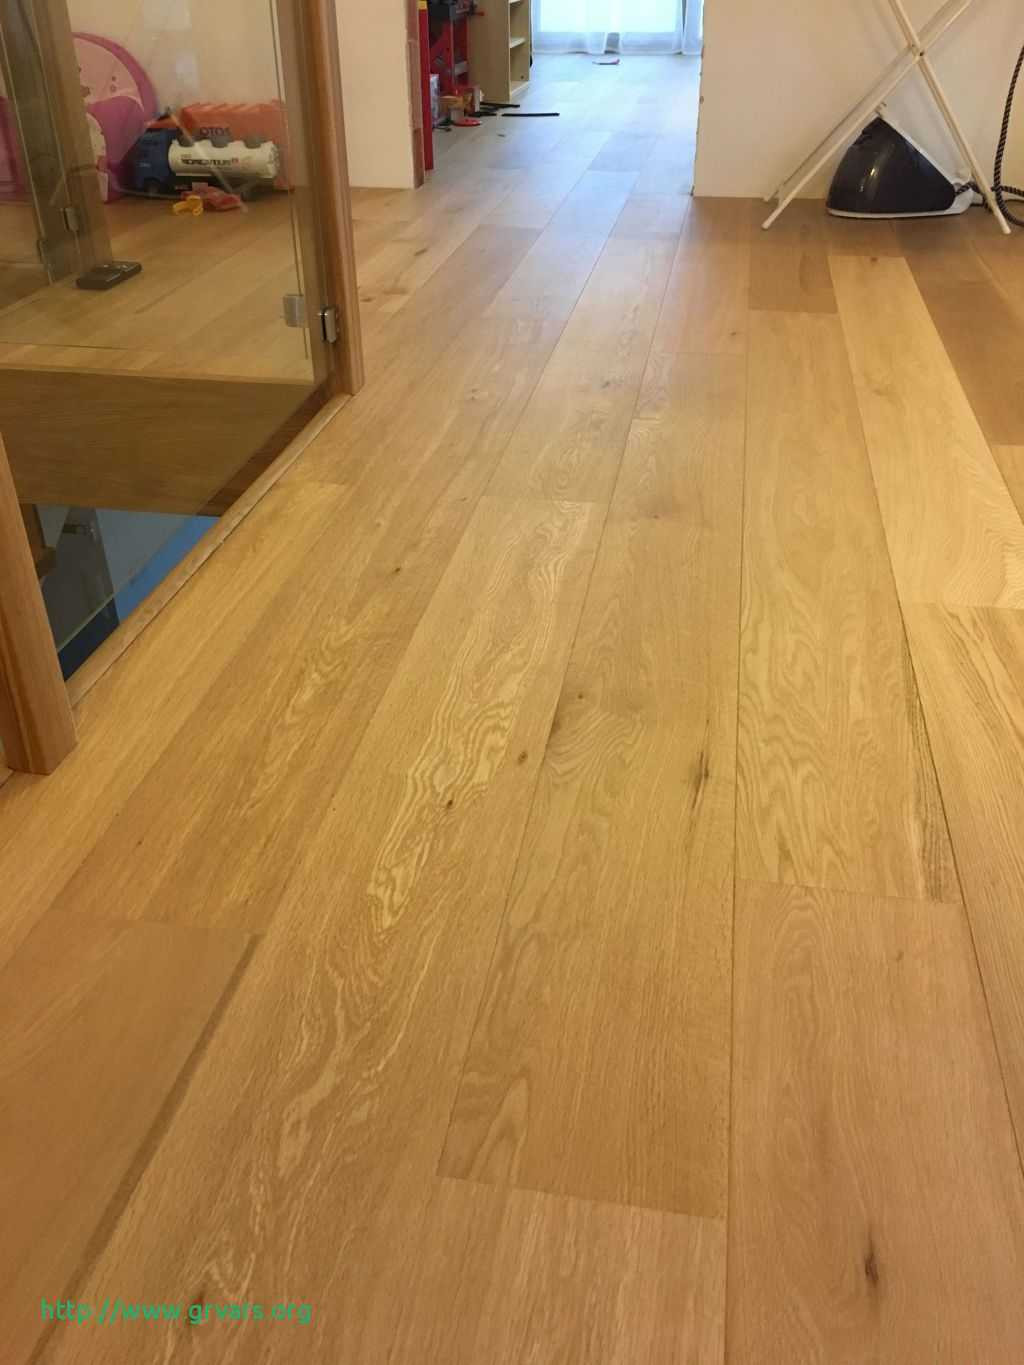 29 Lovely Hardwood Floor Repair Gaps In the Planks 2024 free download hardwood floor repair gaps in the planks of 18 beau what type of hardwood floor do i have ideas blog within multi color wood floor new naturalny dub od belgickaho vac2bdrobcu lamett